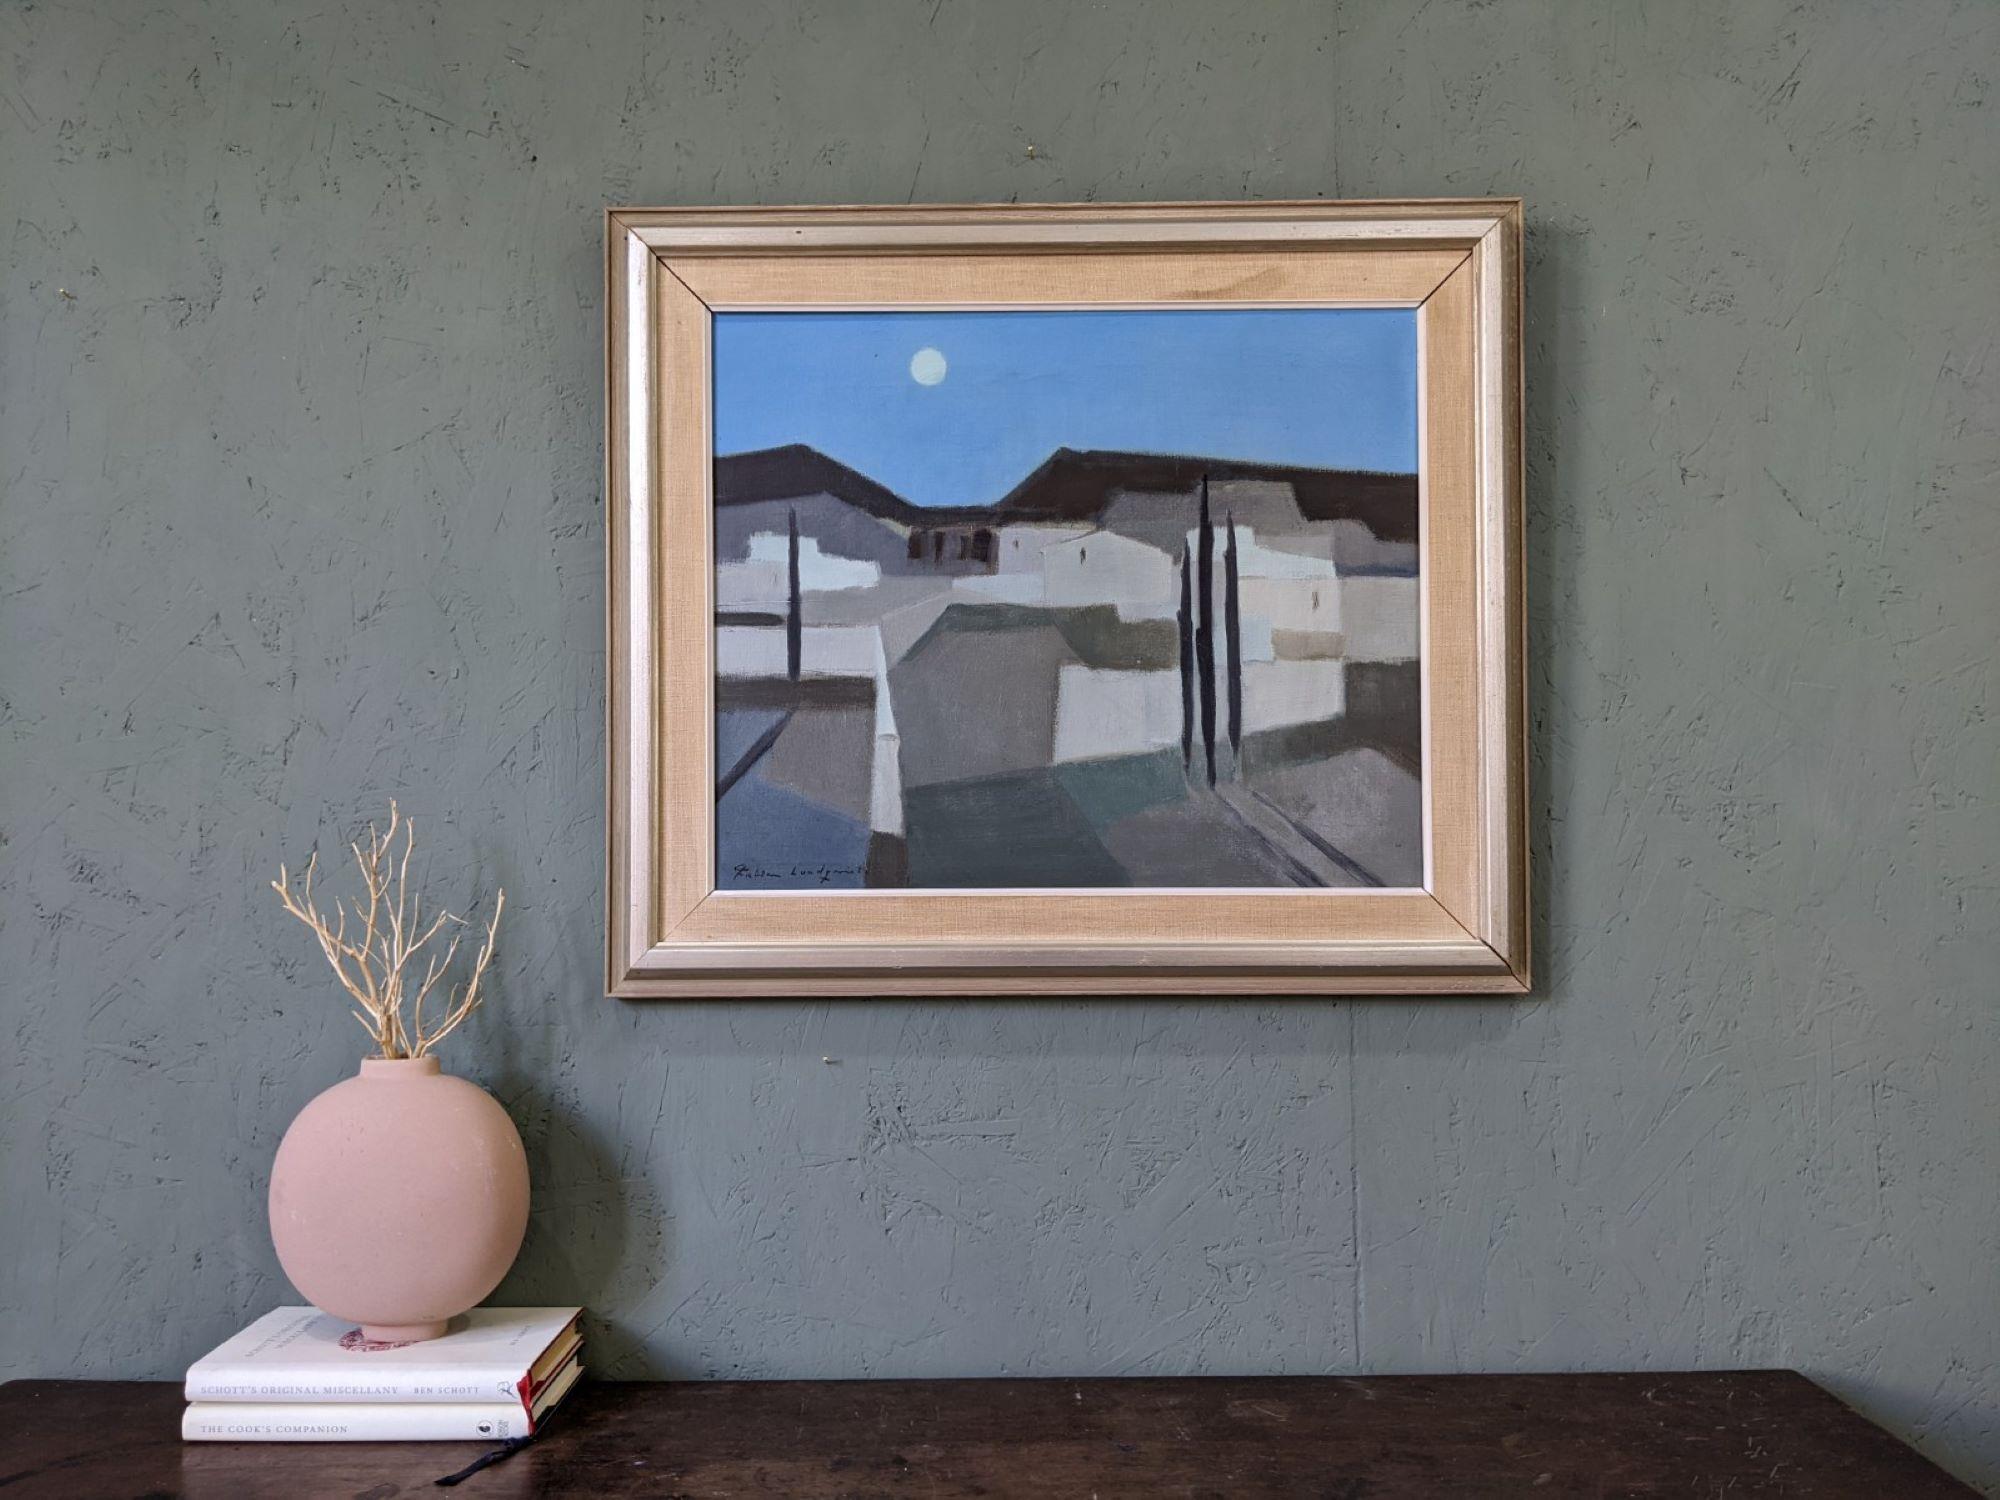 MOONLIGHT
Size: 51 x 59 cm (including frame)
Oil on canvas

An atmospheric modernist style composition executed in oil onto canvas by the well-established Swedish artist Fabian Lundqvist (1913-1989).

The painting presents a night scene with a moon